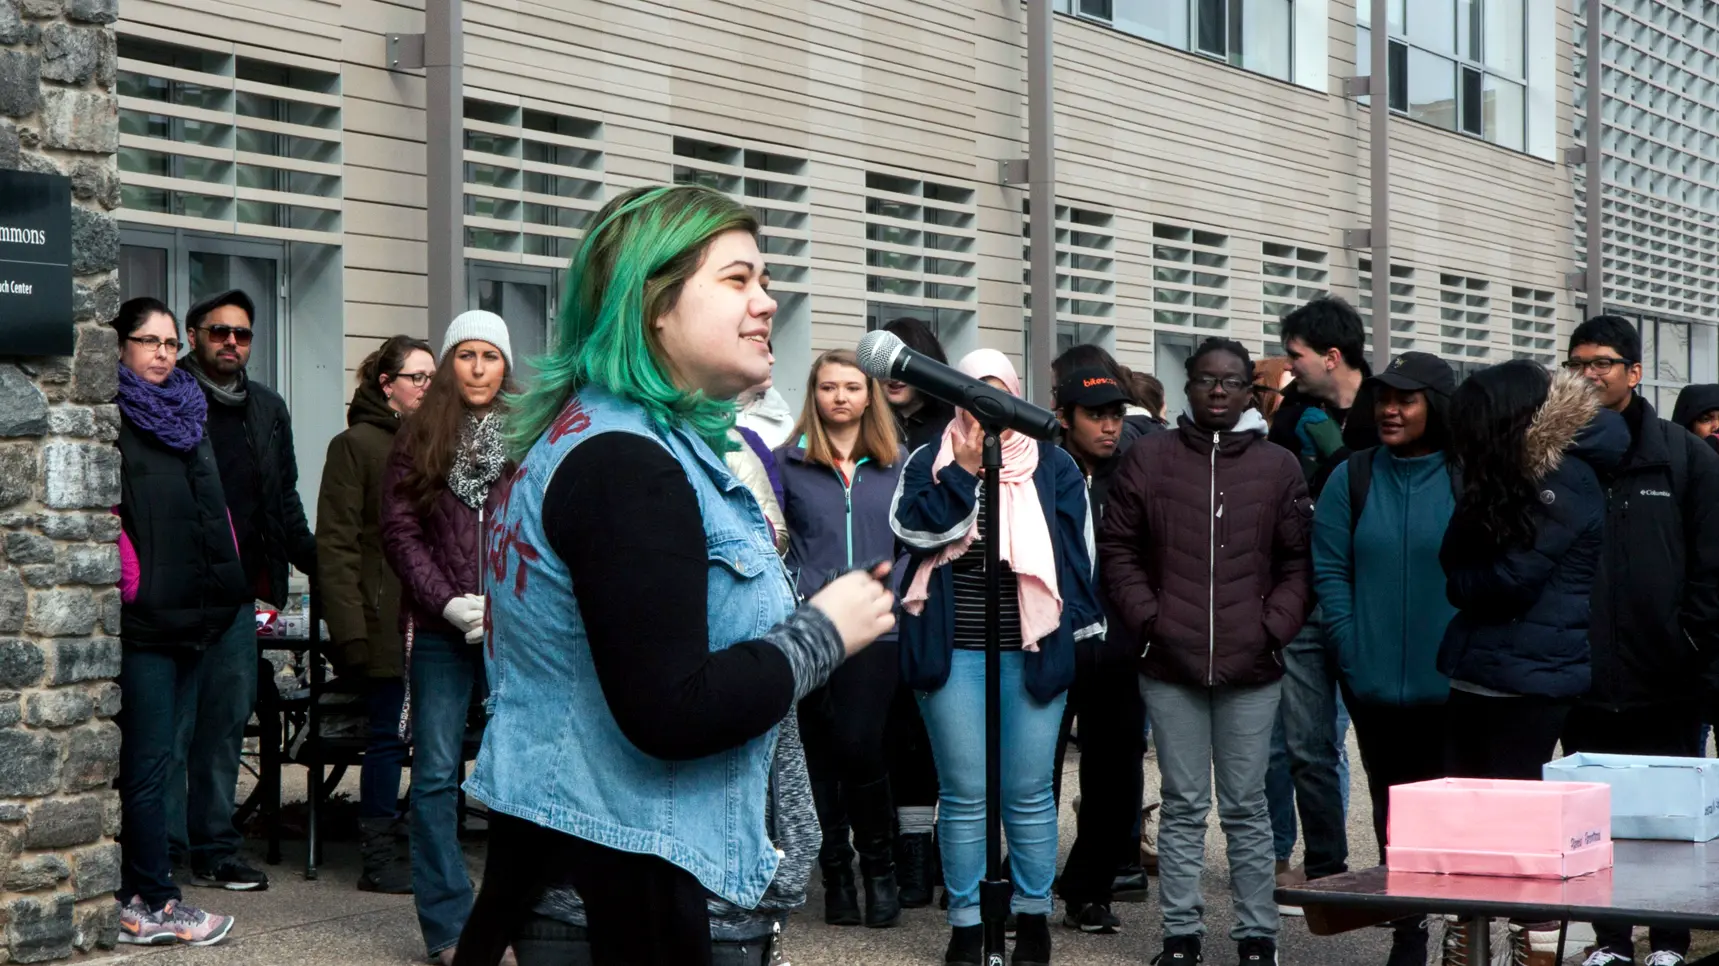 A student at a rally speaking in front of a group of other students